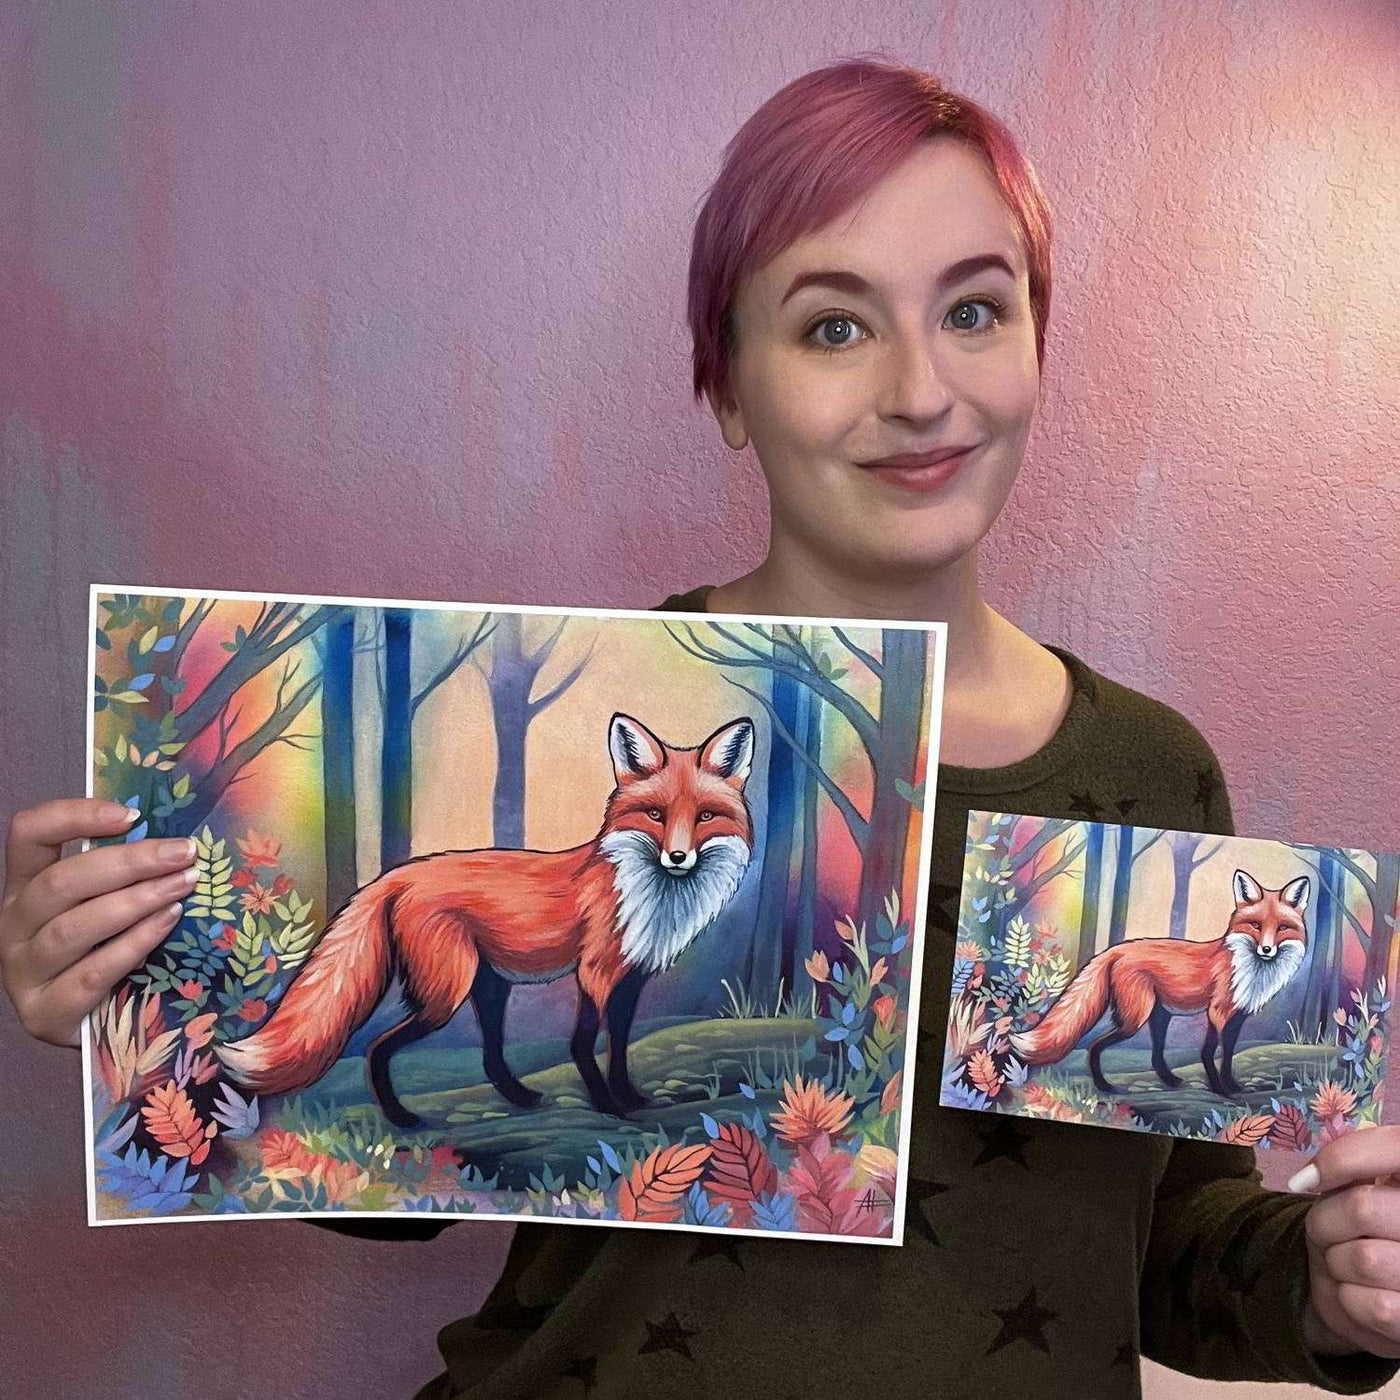 Smiling woman with pink hair presenting two differently sized art prints depicting a red fox in a mystical twilight forest.